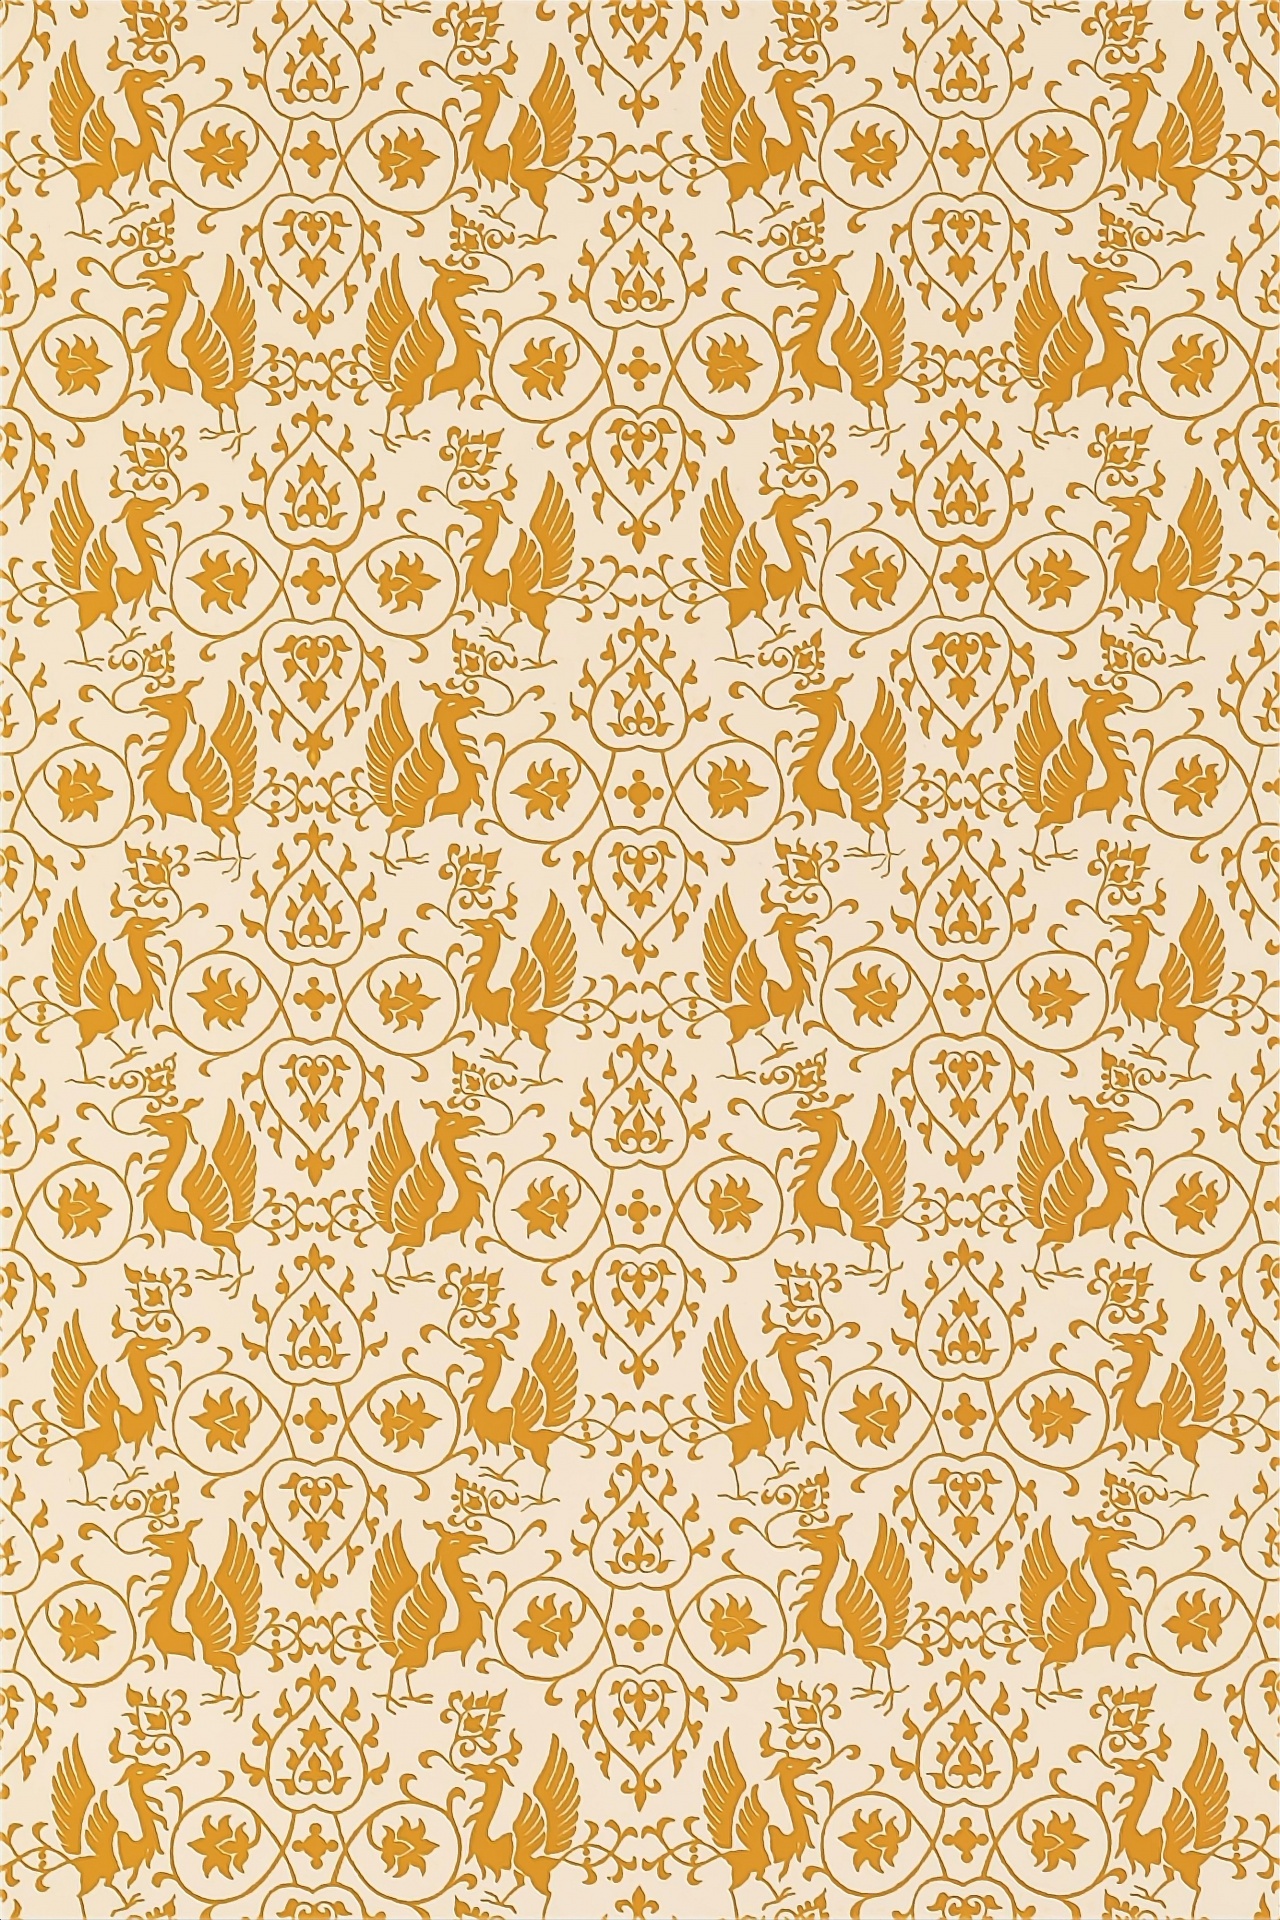 This pattern is a representation of the design from the dresses of the central figures in Andrea Orcagna’s died 1376 great painting of the Coronation of the Virgin, and is a fair example of the numerous textile designs found in paintings of this pe